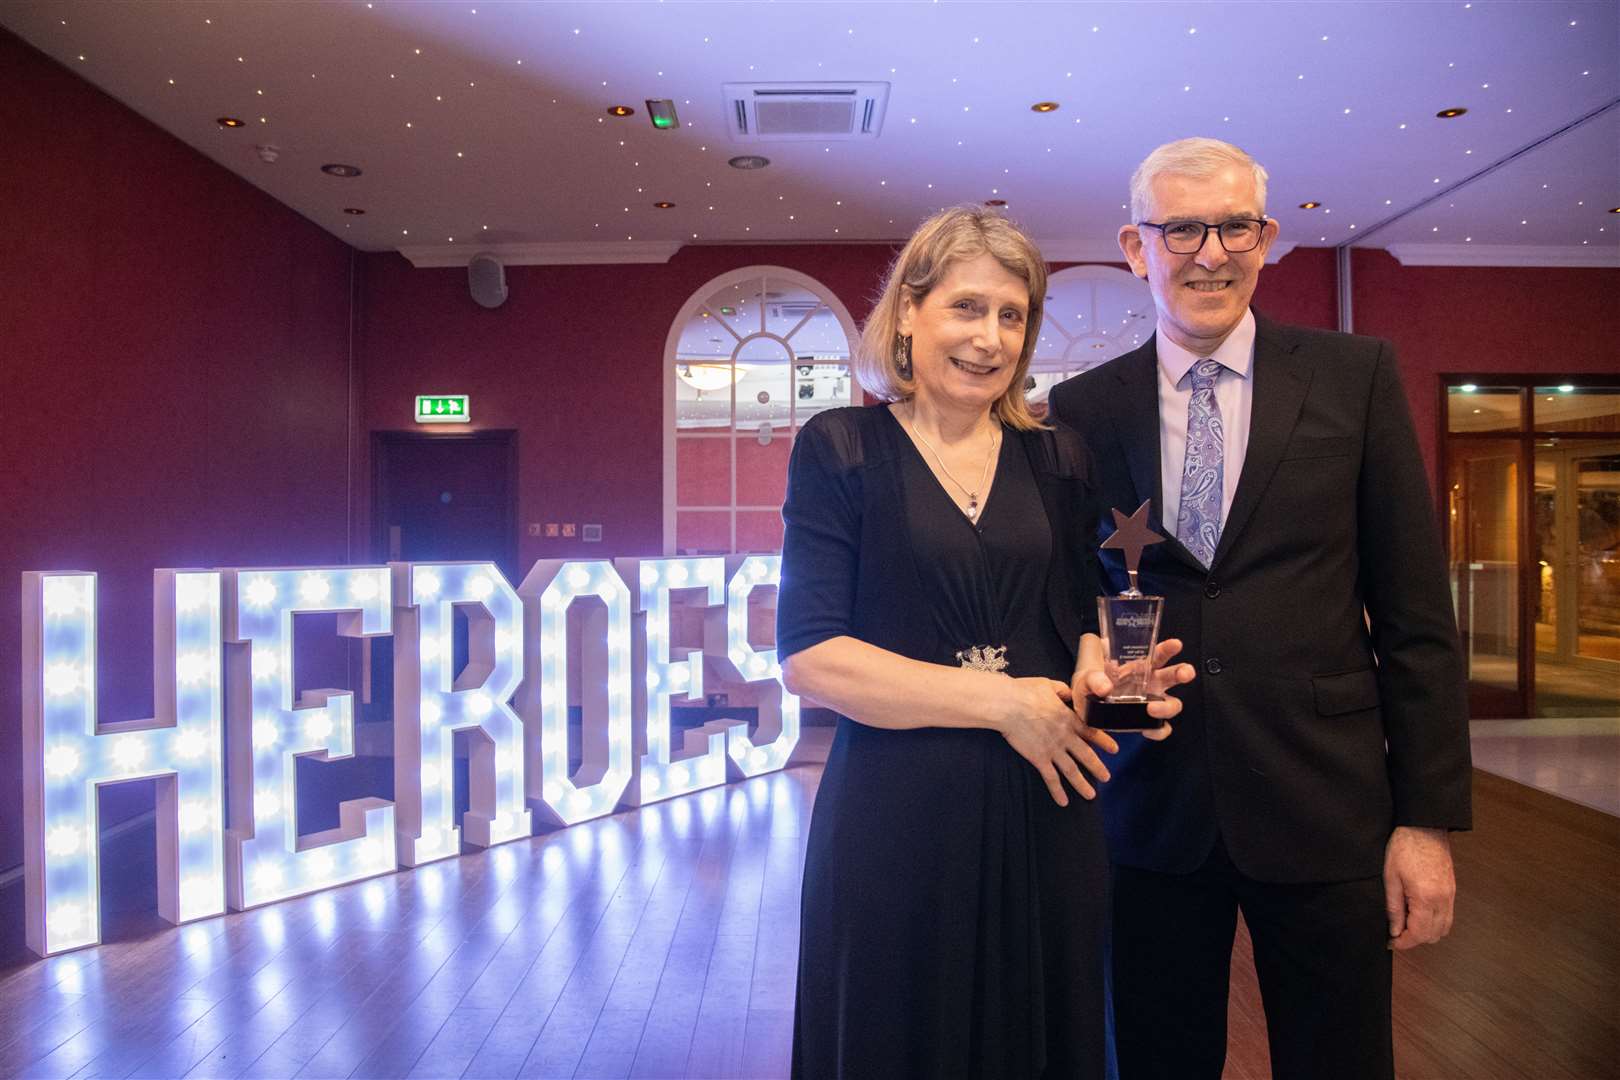 Winners of the Healthcare Hero award, Dr Alison Barbour and Dr Iain Brooker. Picture: Daniel Forsyth